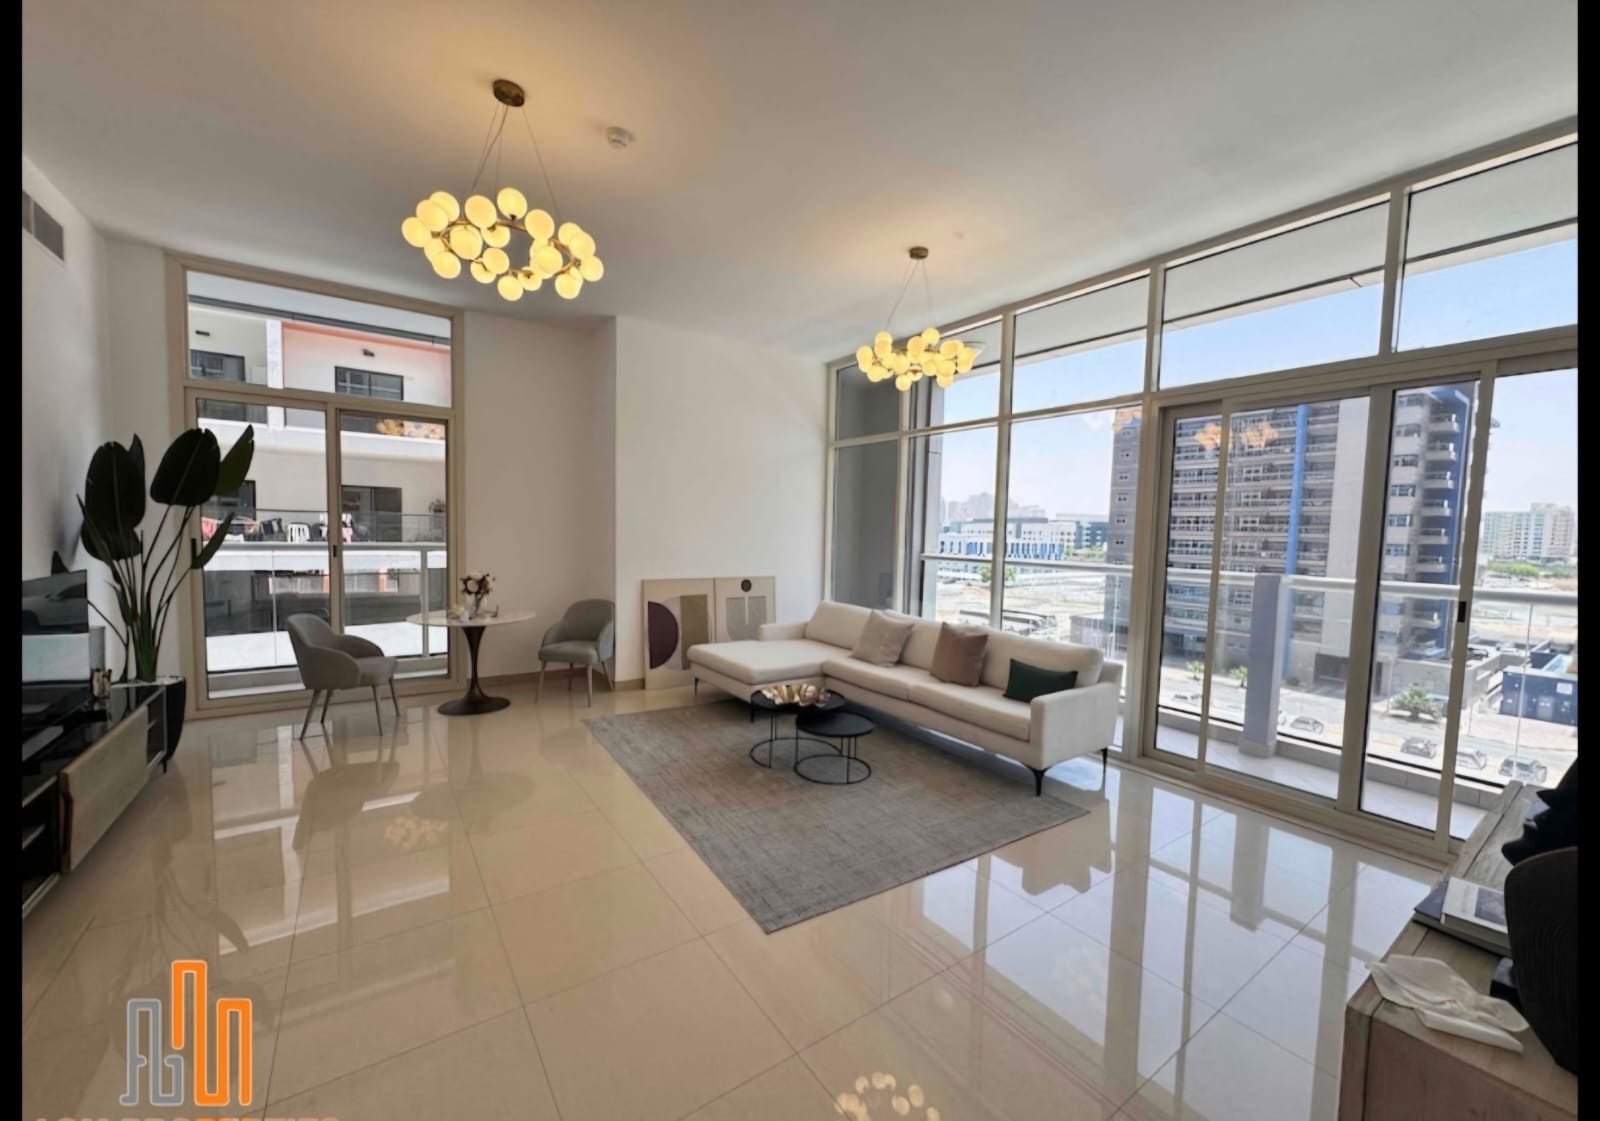 1 BED APPARTMENT FOR SALE IN MILLENIUM TOWER